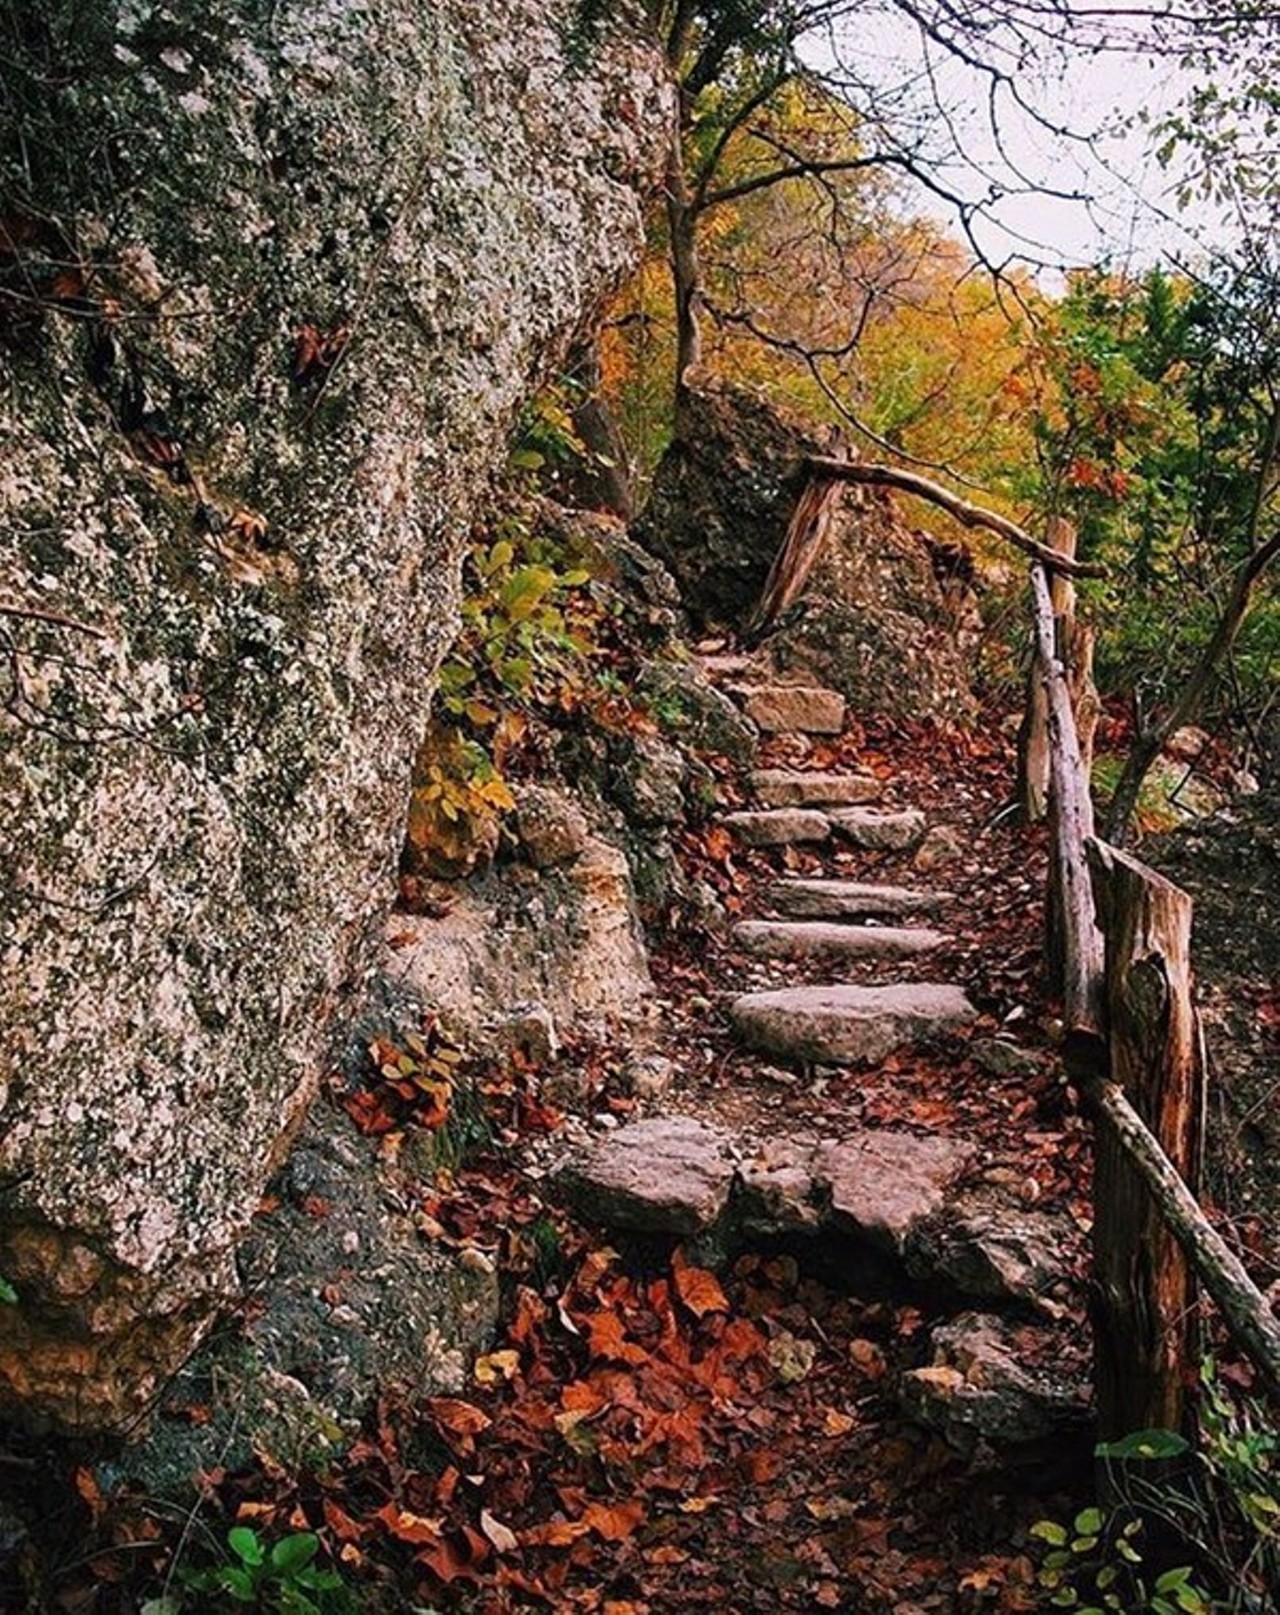 Take a Hike
San Antonio's city parks offer plenty of trails to explore, but if you feel like getting a little further out, vIsit the Texas Parks and Wildlife Department's website. Plenty of amazing natural sites are a relatively quick drive from SA. 
Photo via Instagram /  lostmaples